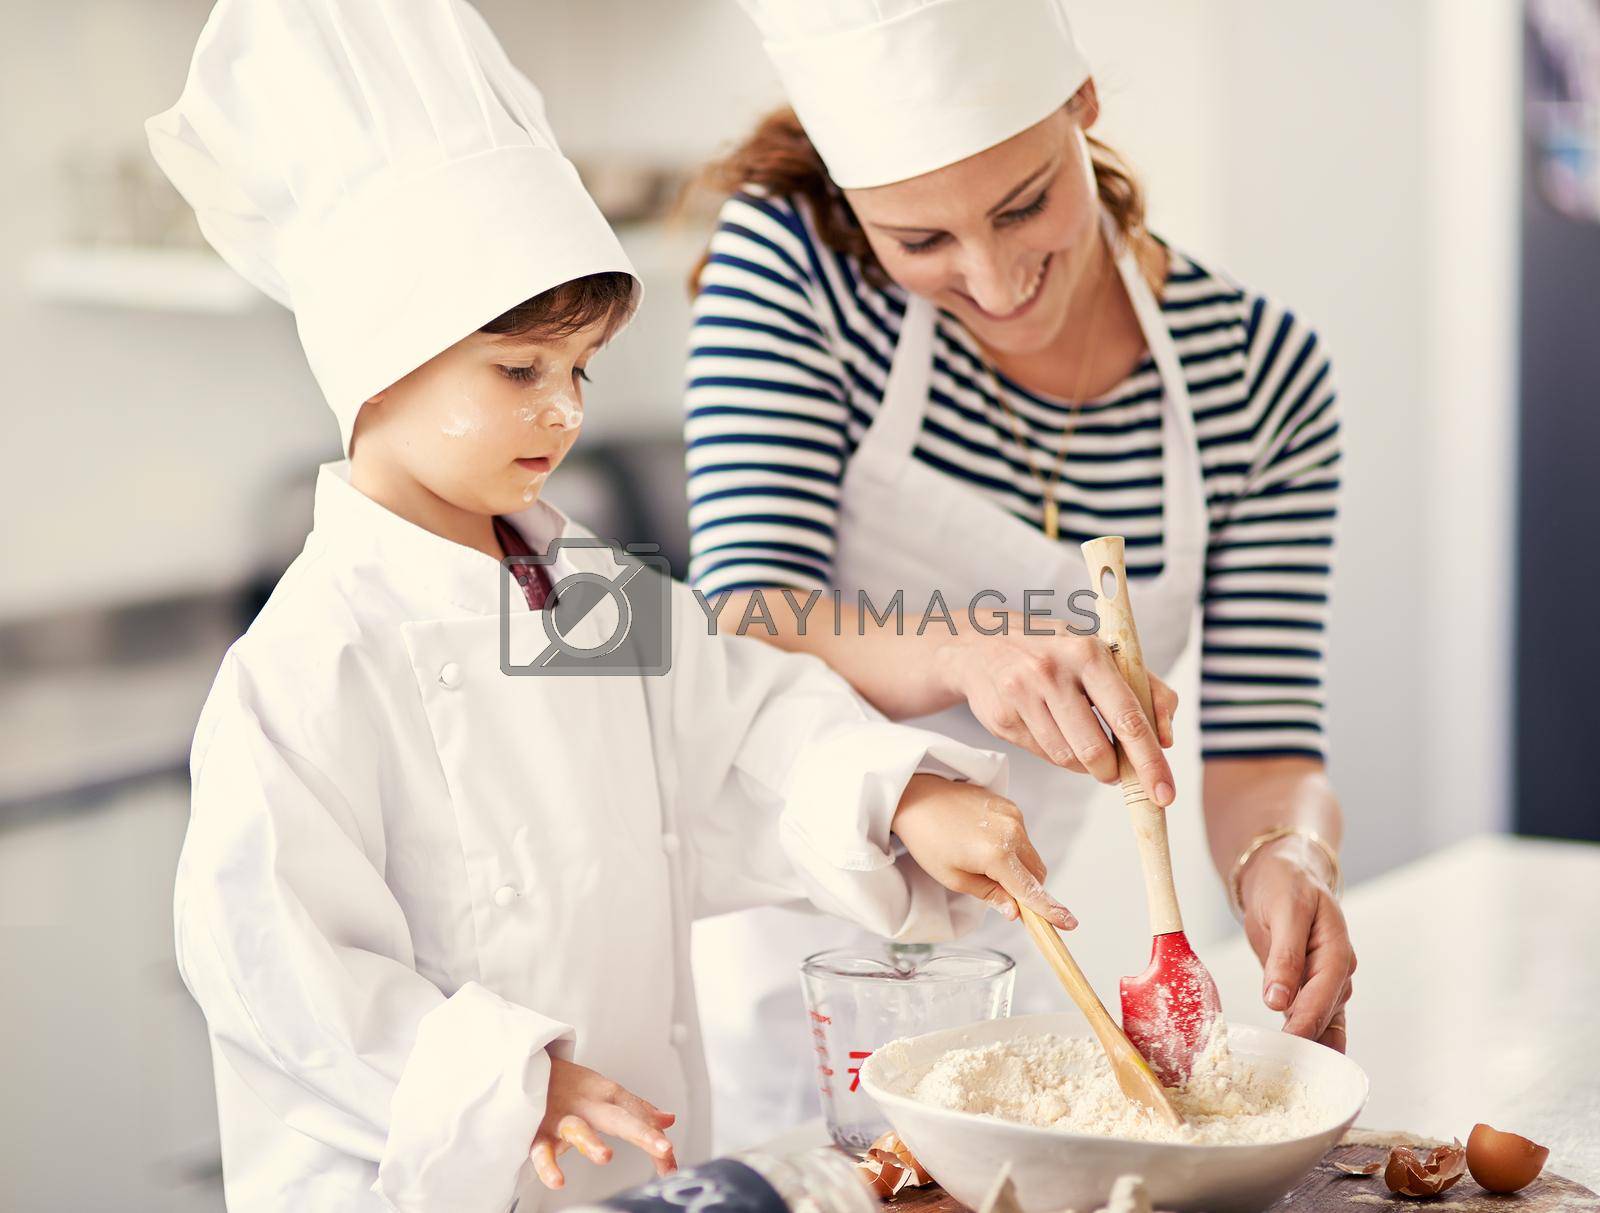 Shot of a mother and her son baking in the kitchen.